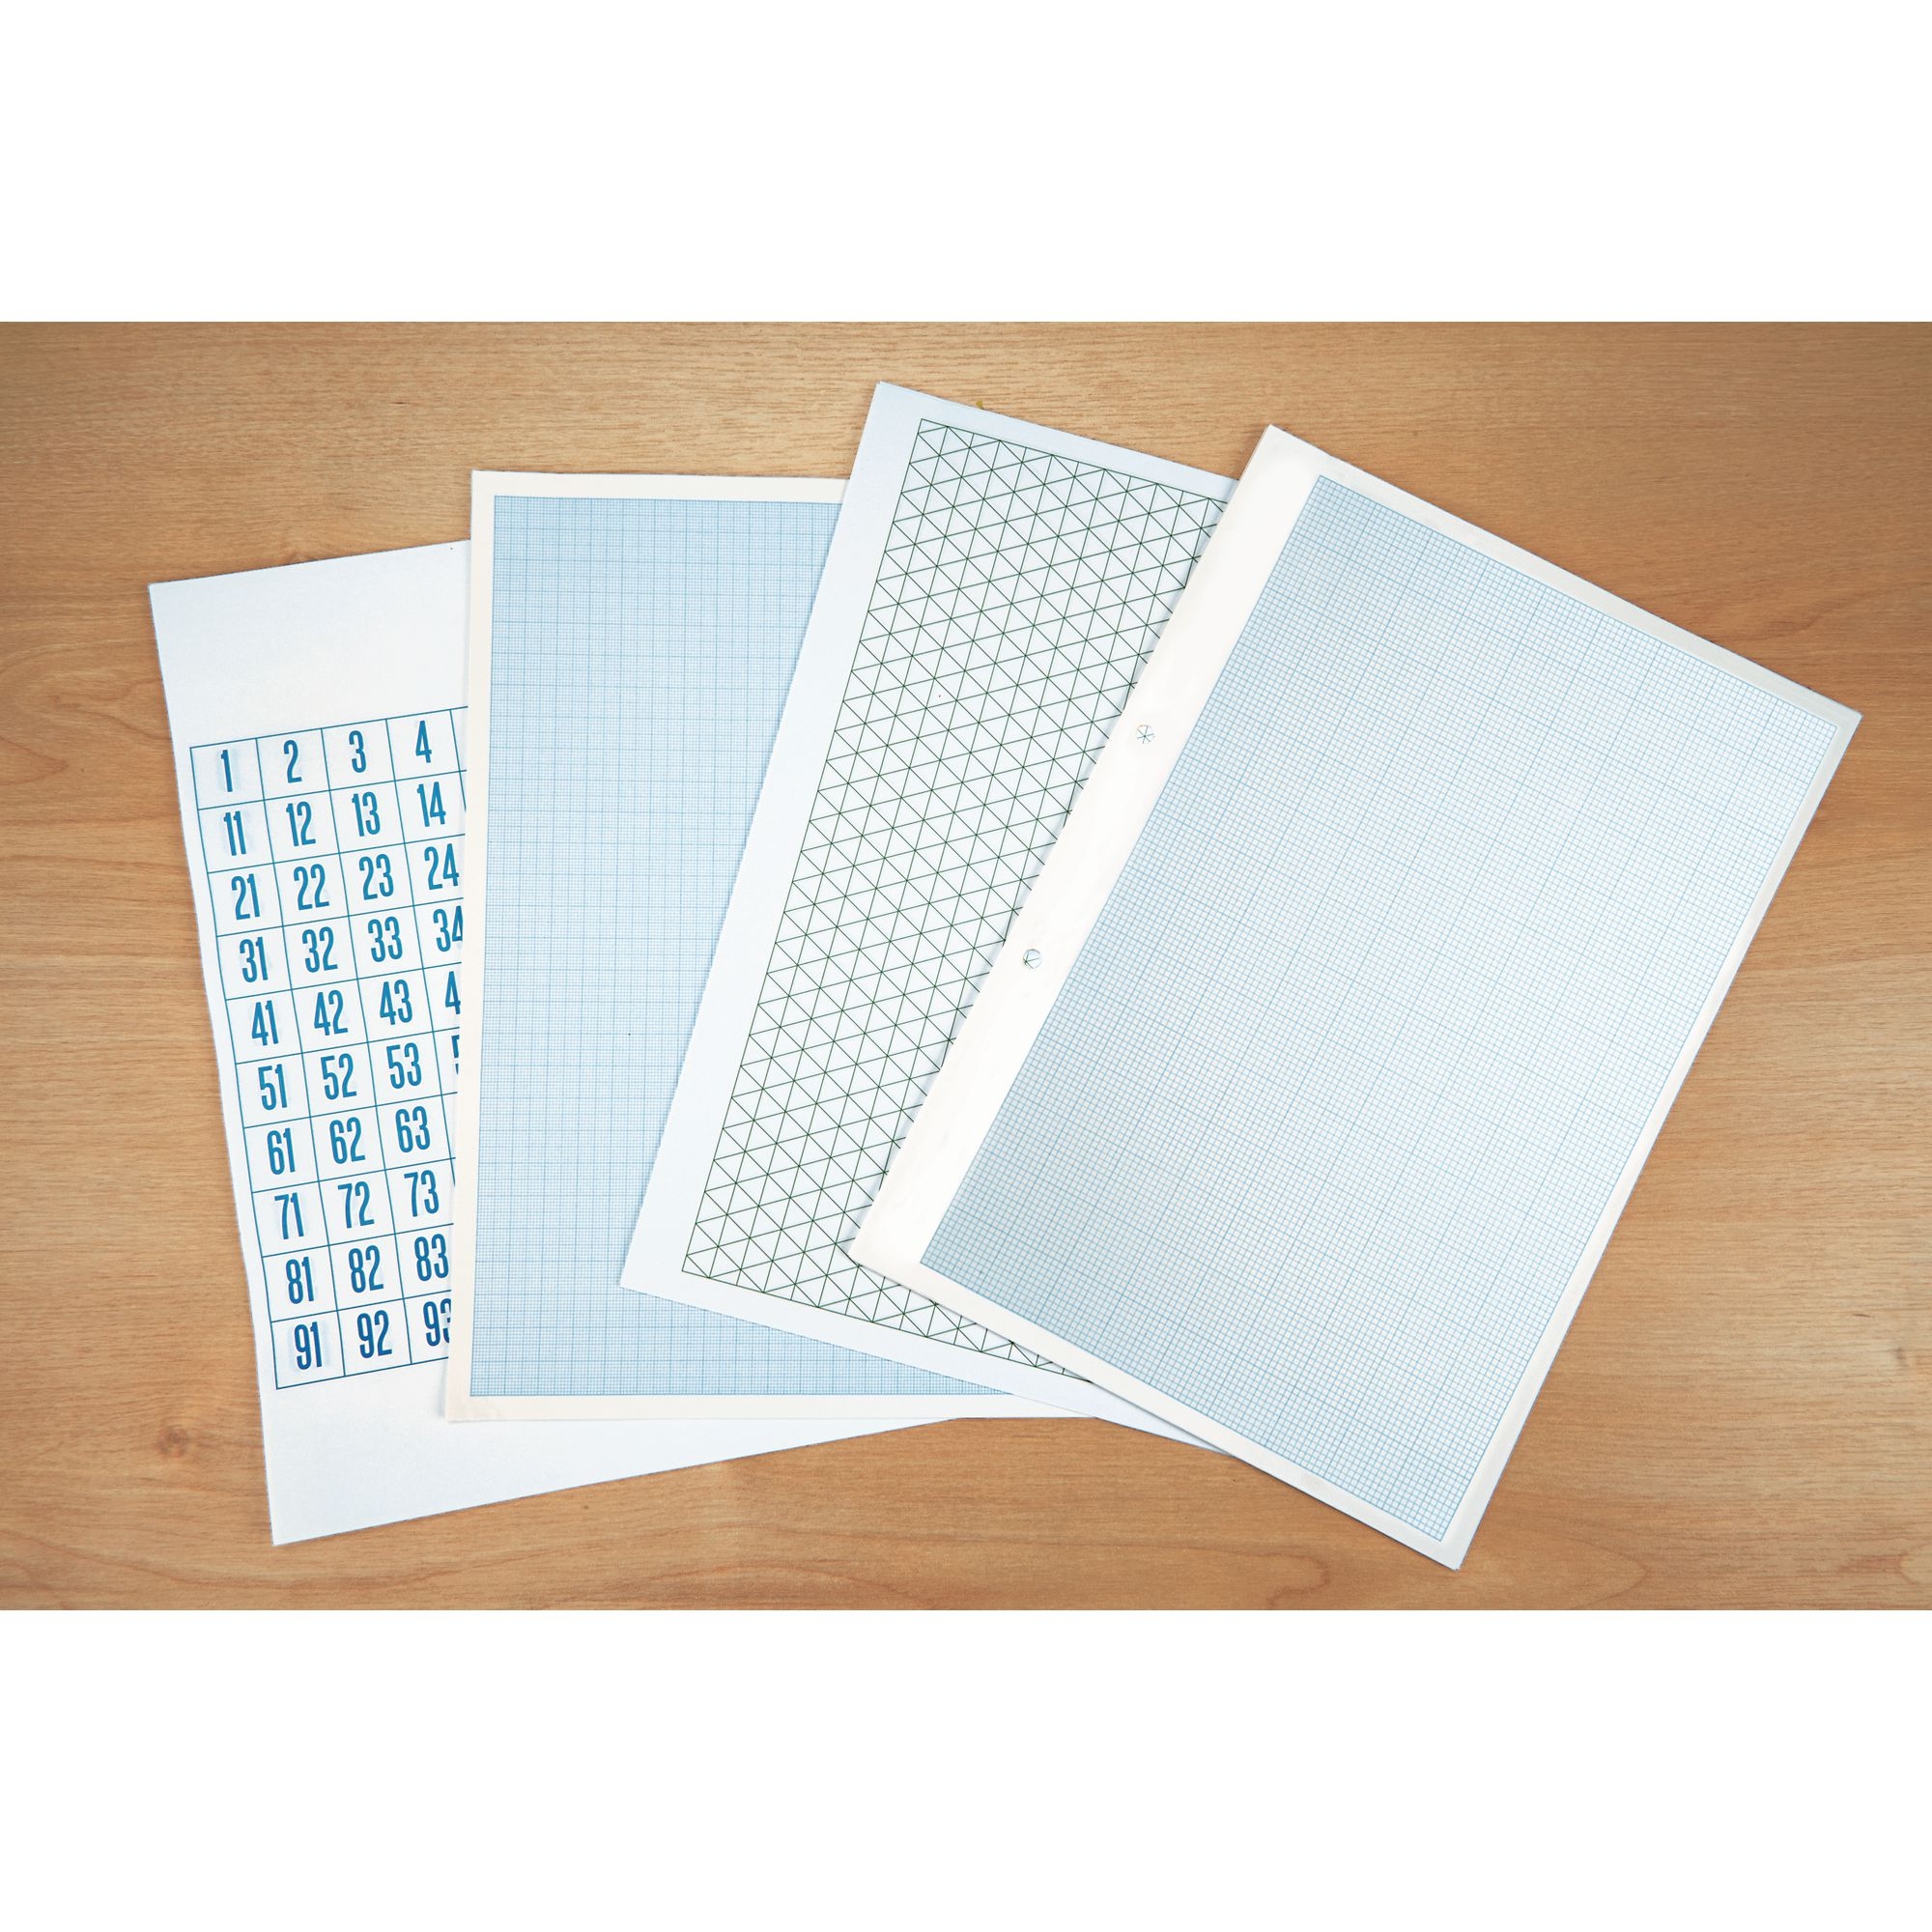 A4 Maths Paper, 2, 10 and 20mm Squared, Unpunched - 1 Ream